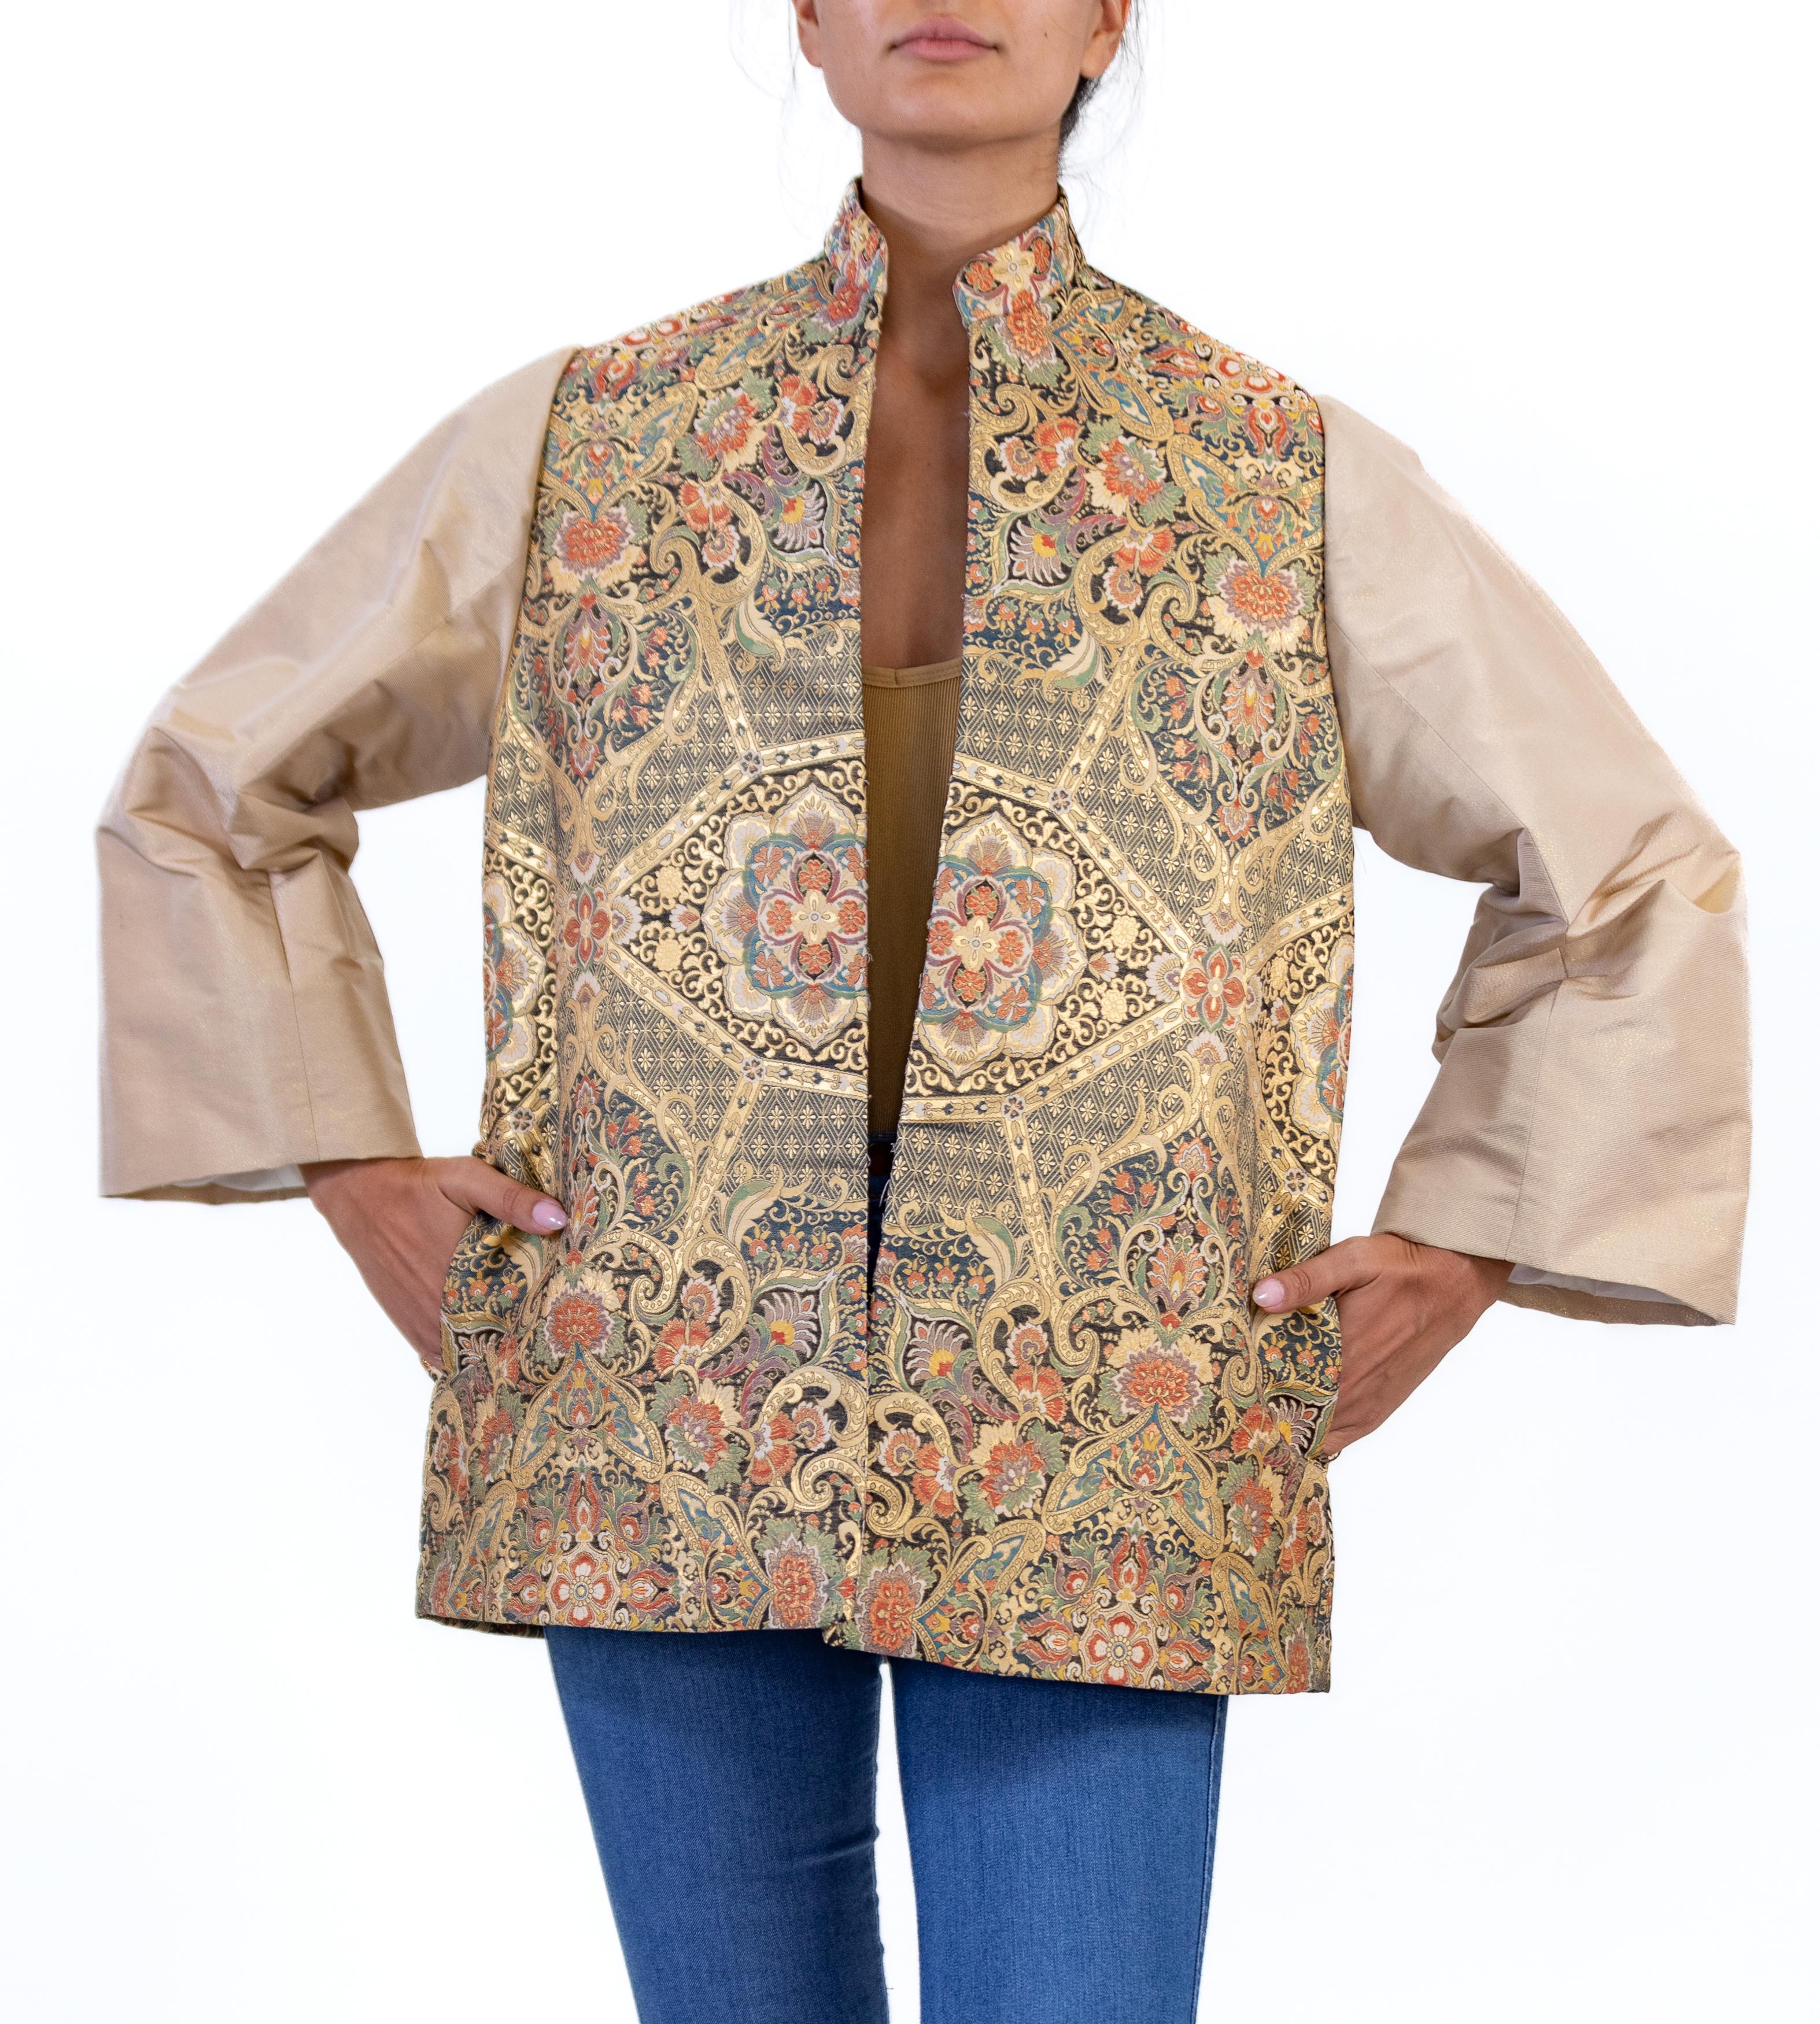 Morphew Collection Gold Metallic Silk Japanese Obi Brocade Jacket In Excellent Condition For Sale In New York, NY